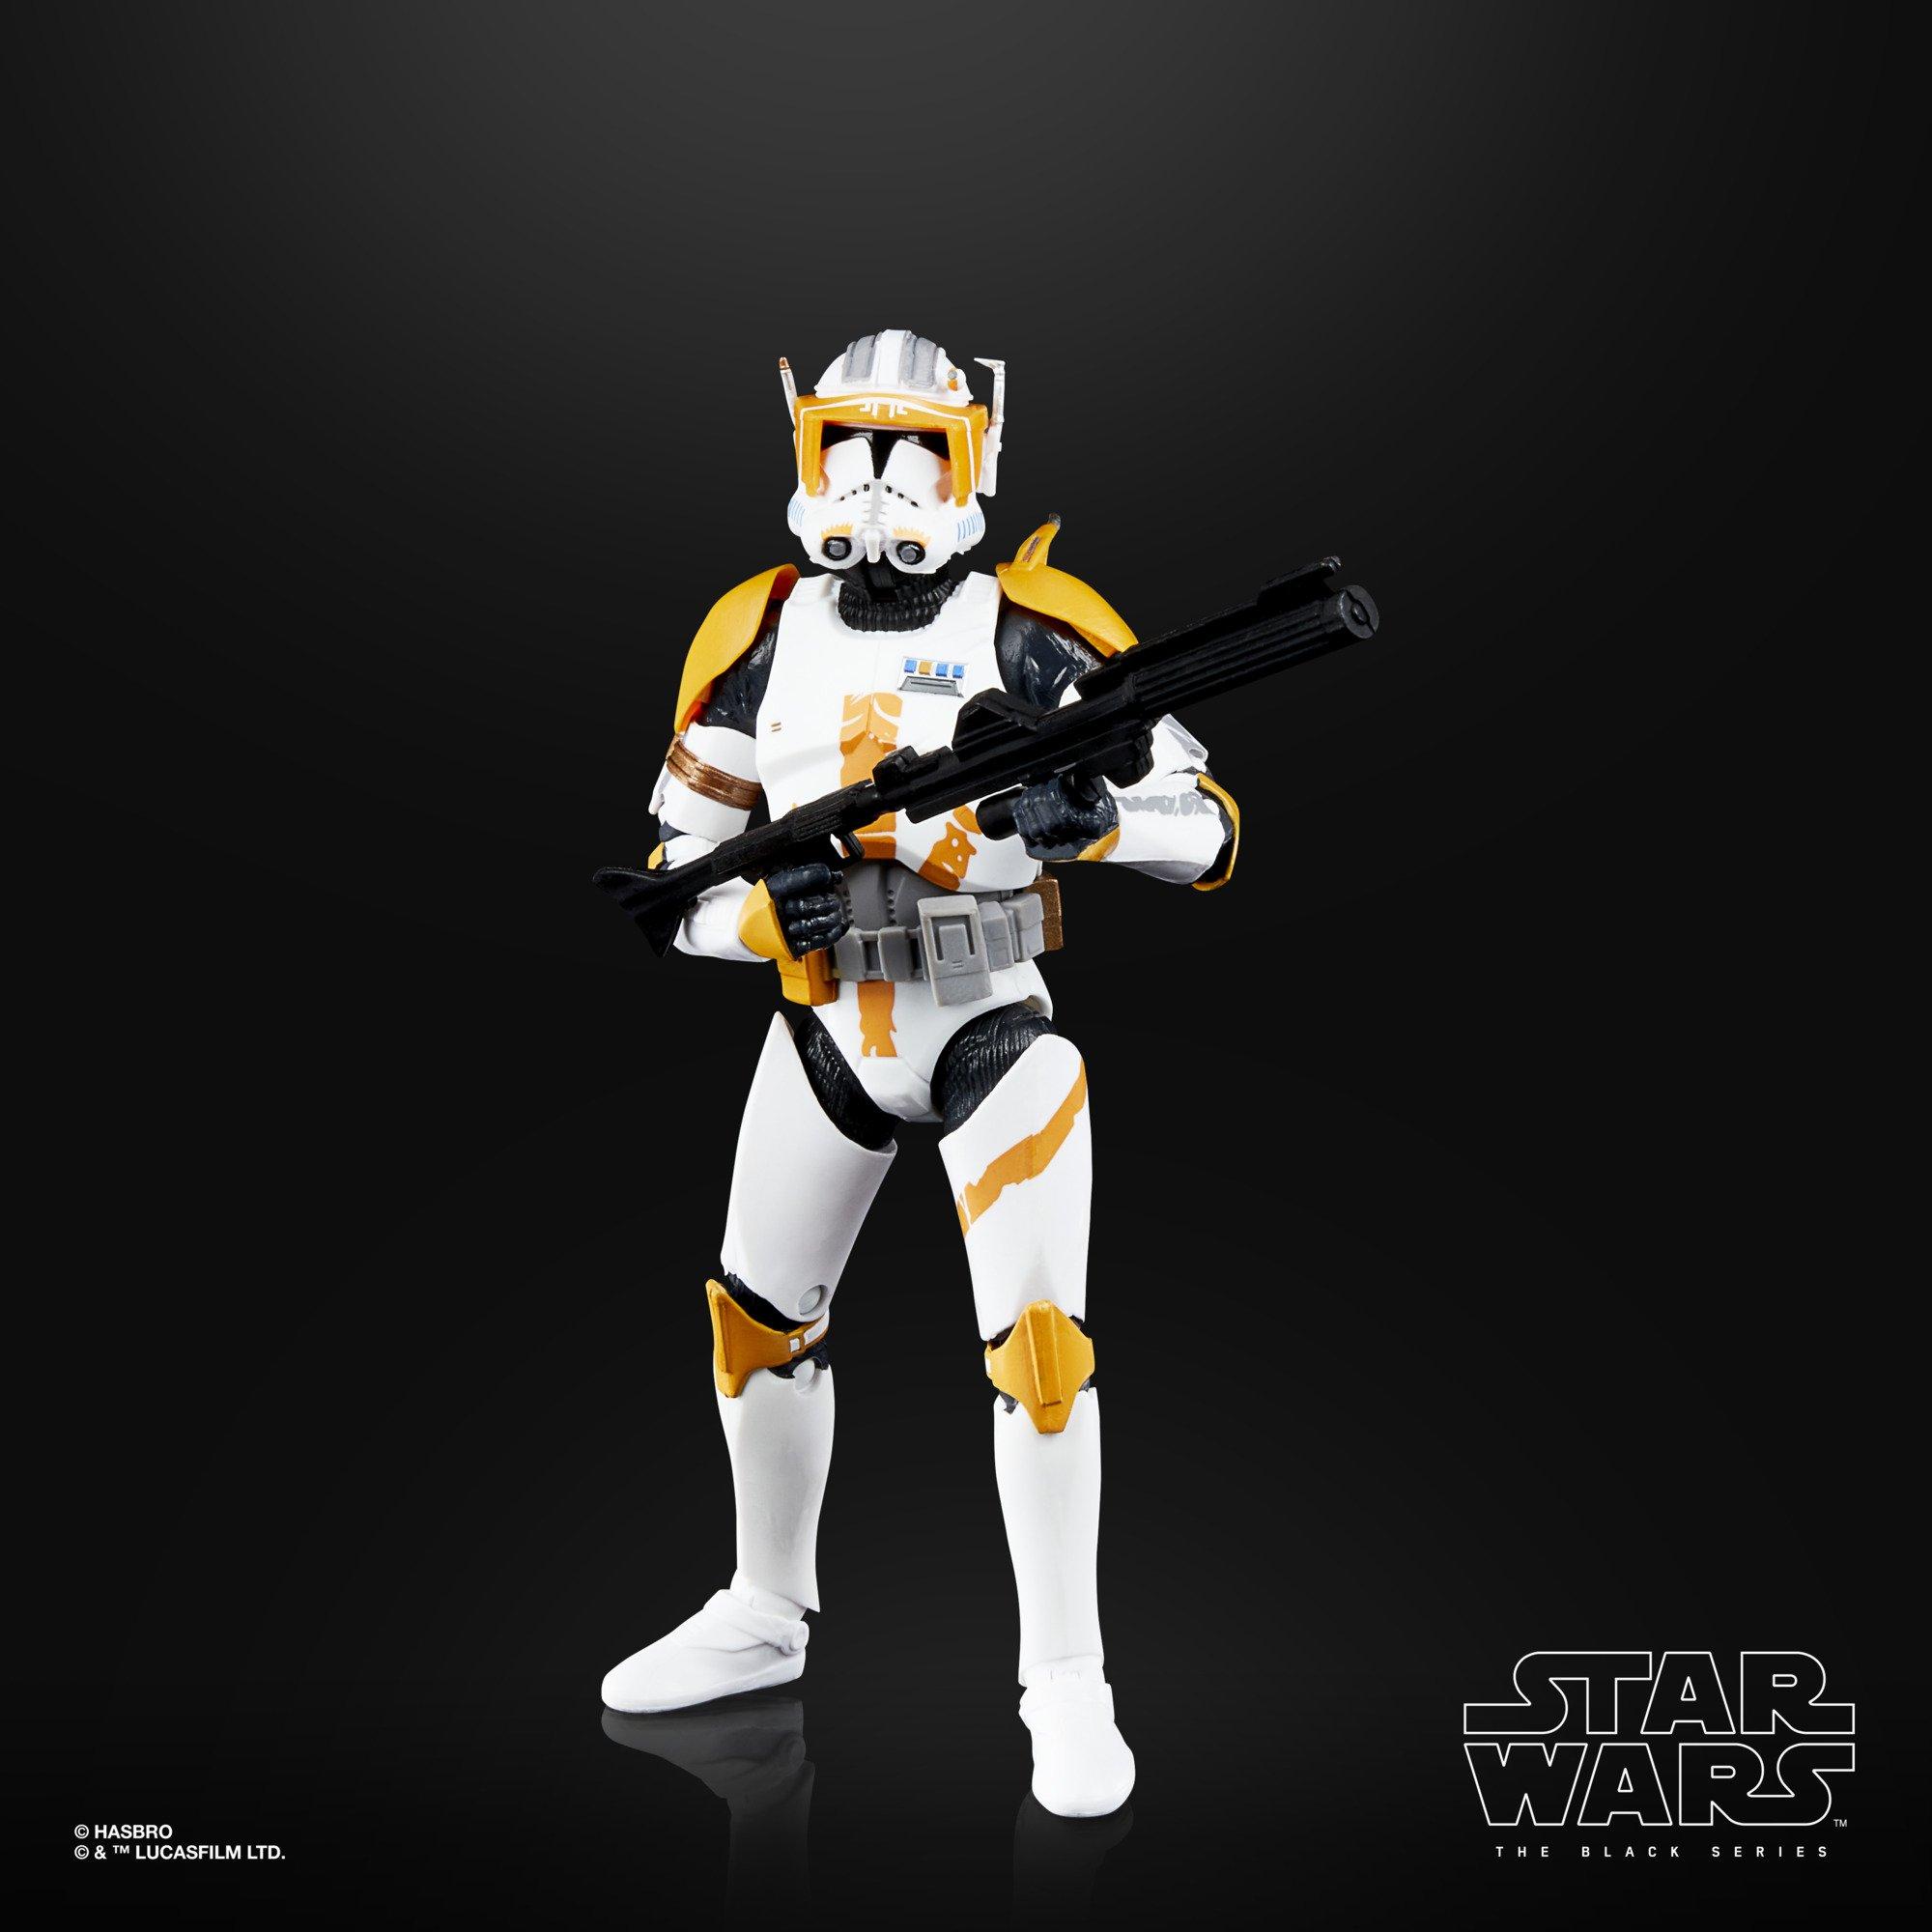 STAR WARS THE BLACK SERIES ARCHIVE LINE COMMANDER CODY 6" 